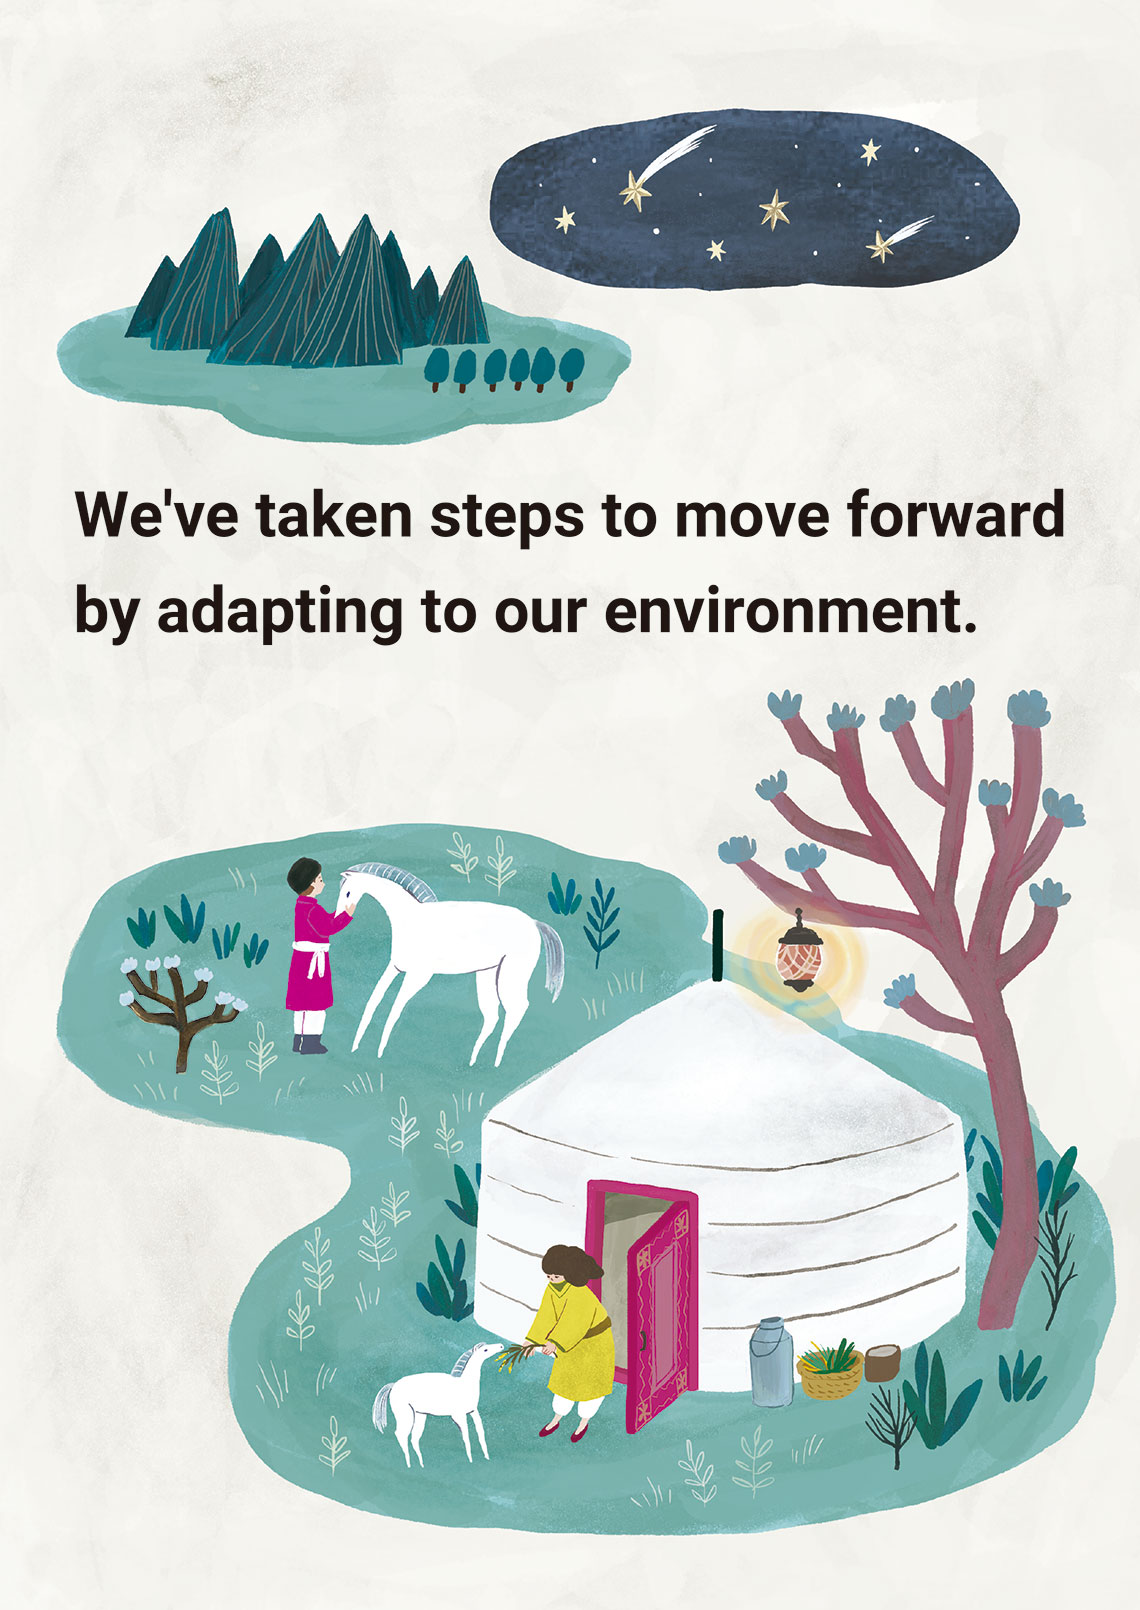 We've taken steps to move forward by adapting to our environment.